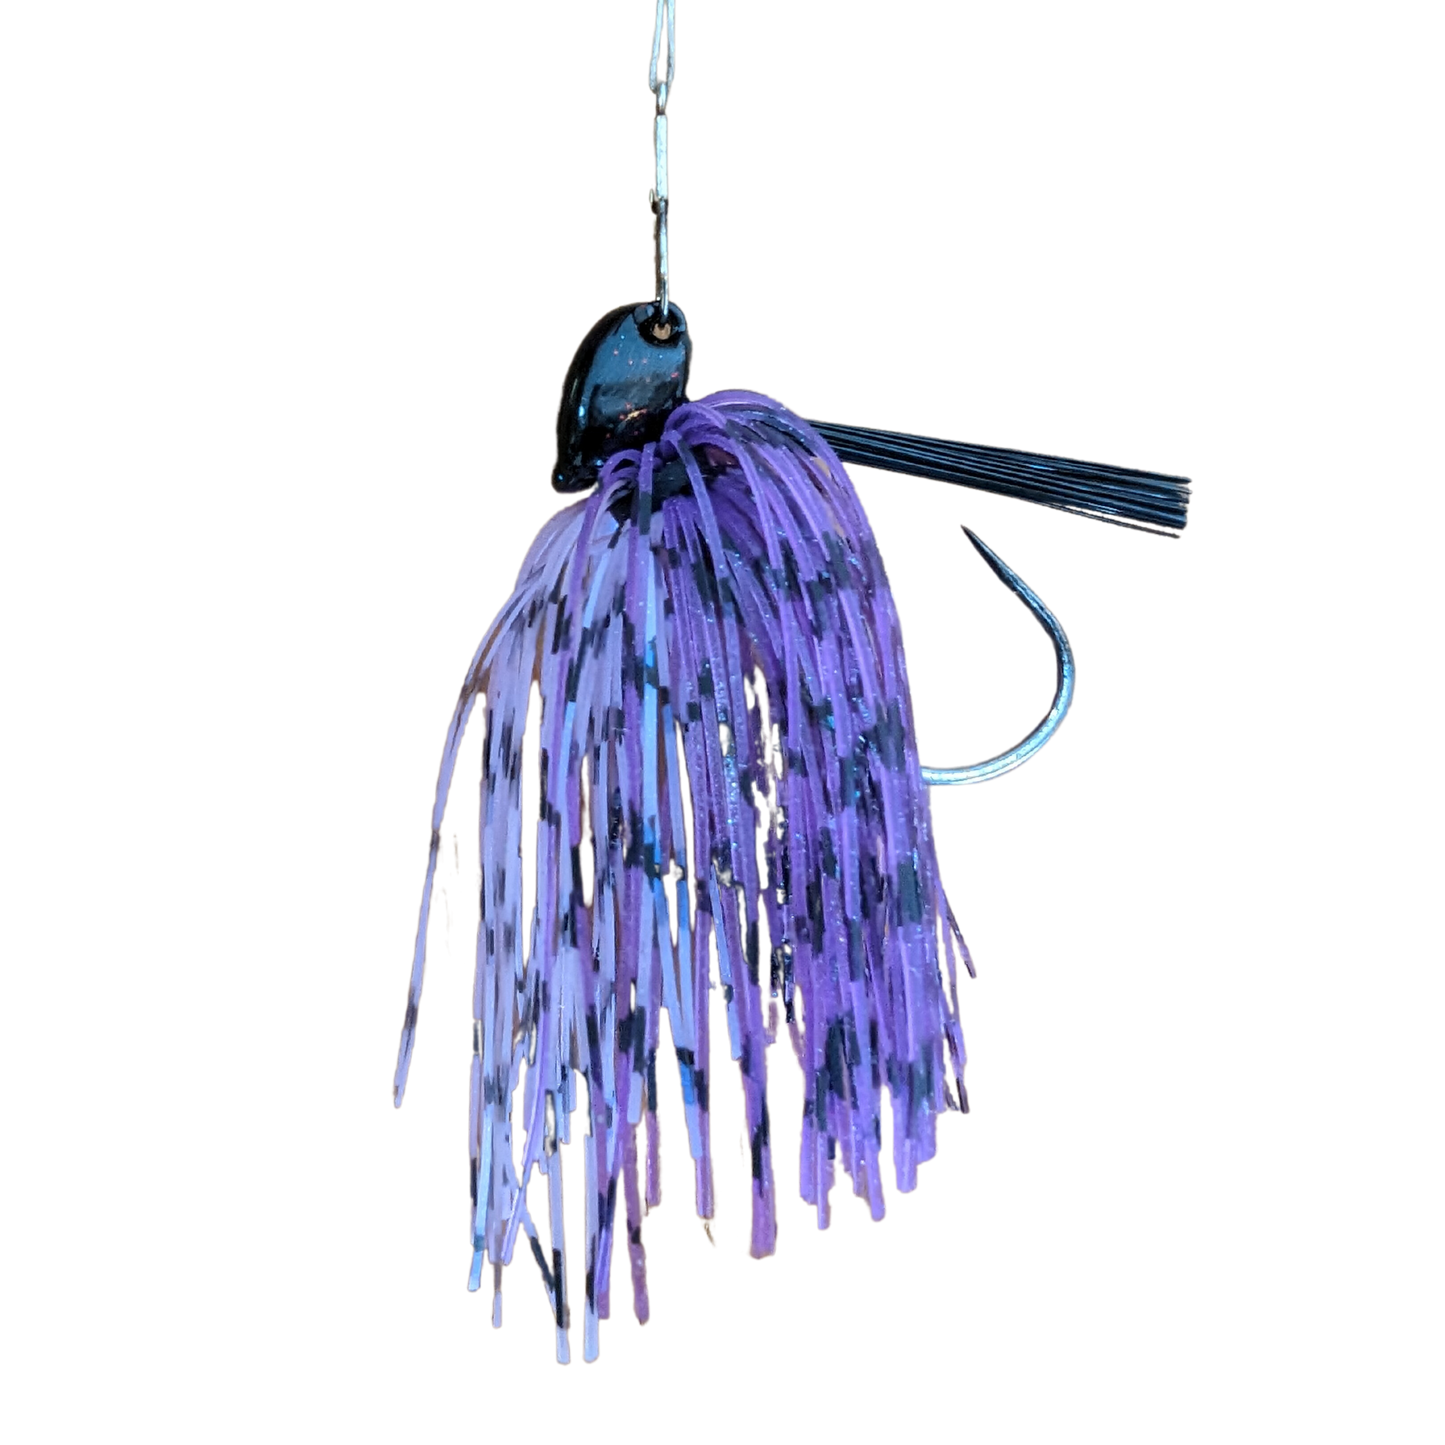 Bright color black purple shine jig with linker skirt for bass fishing with weed guard and hidden eye